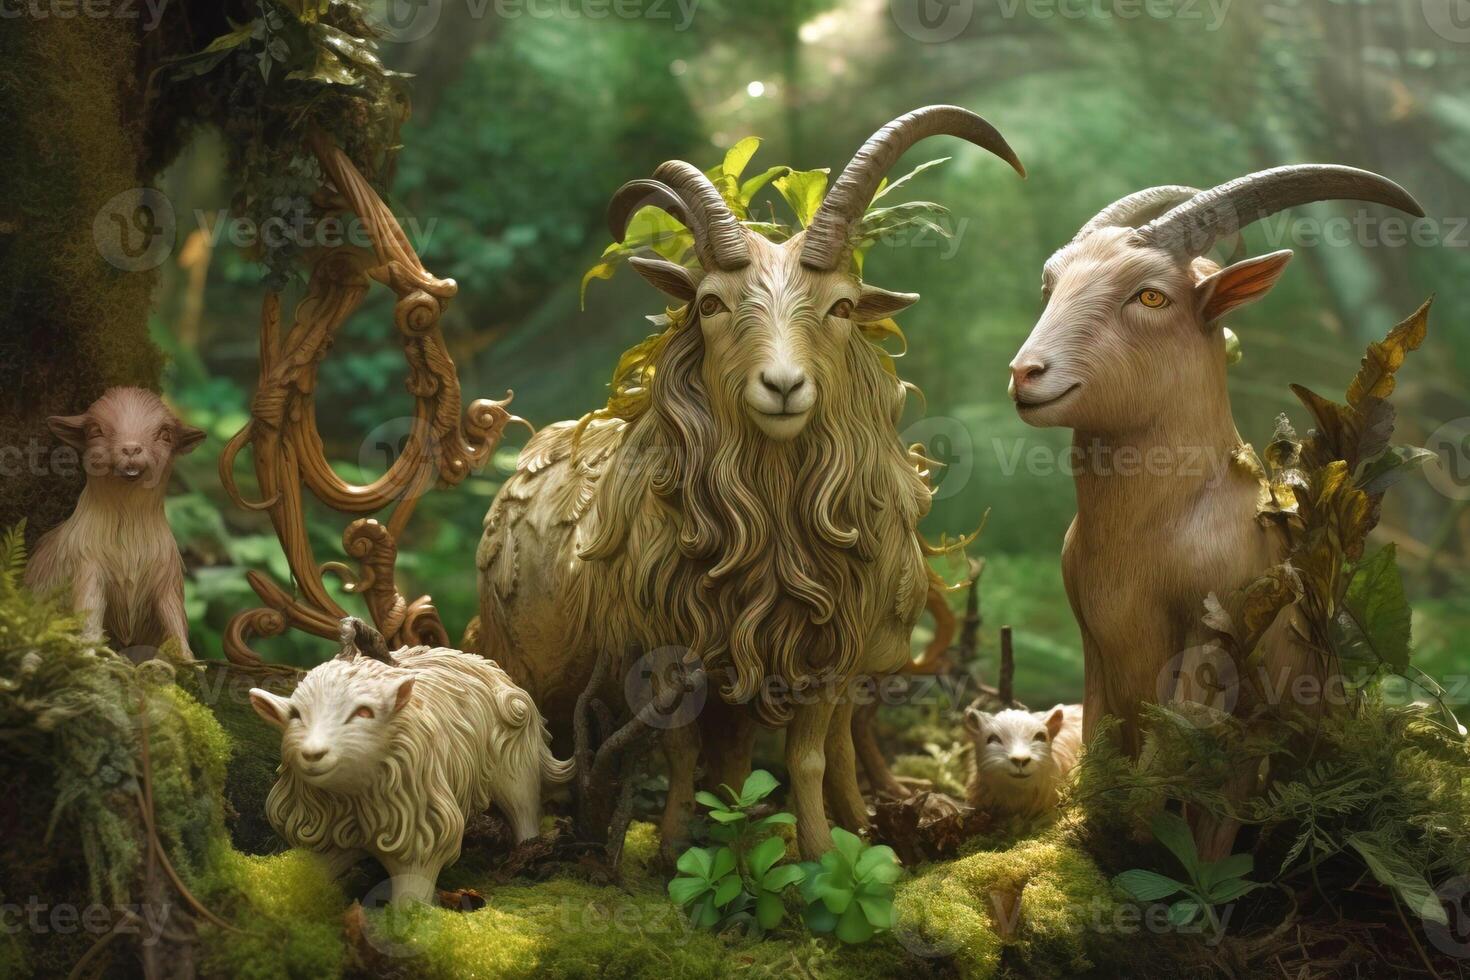 Forest deities mythological goats with horns, creature from legends. . photo